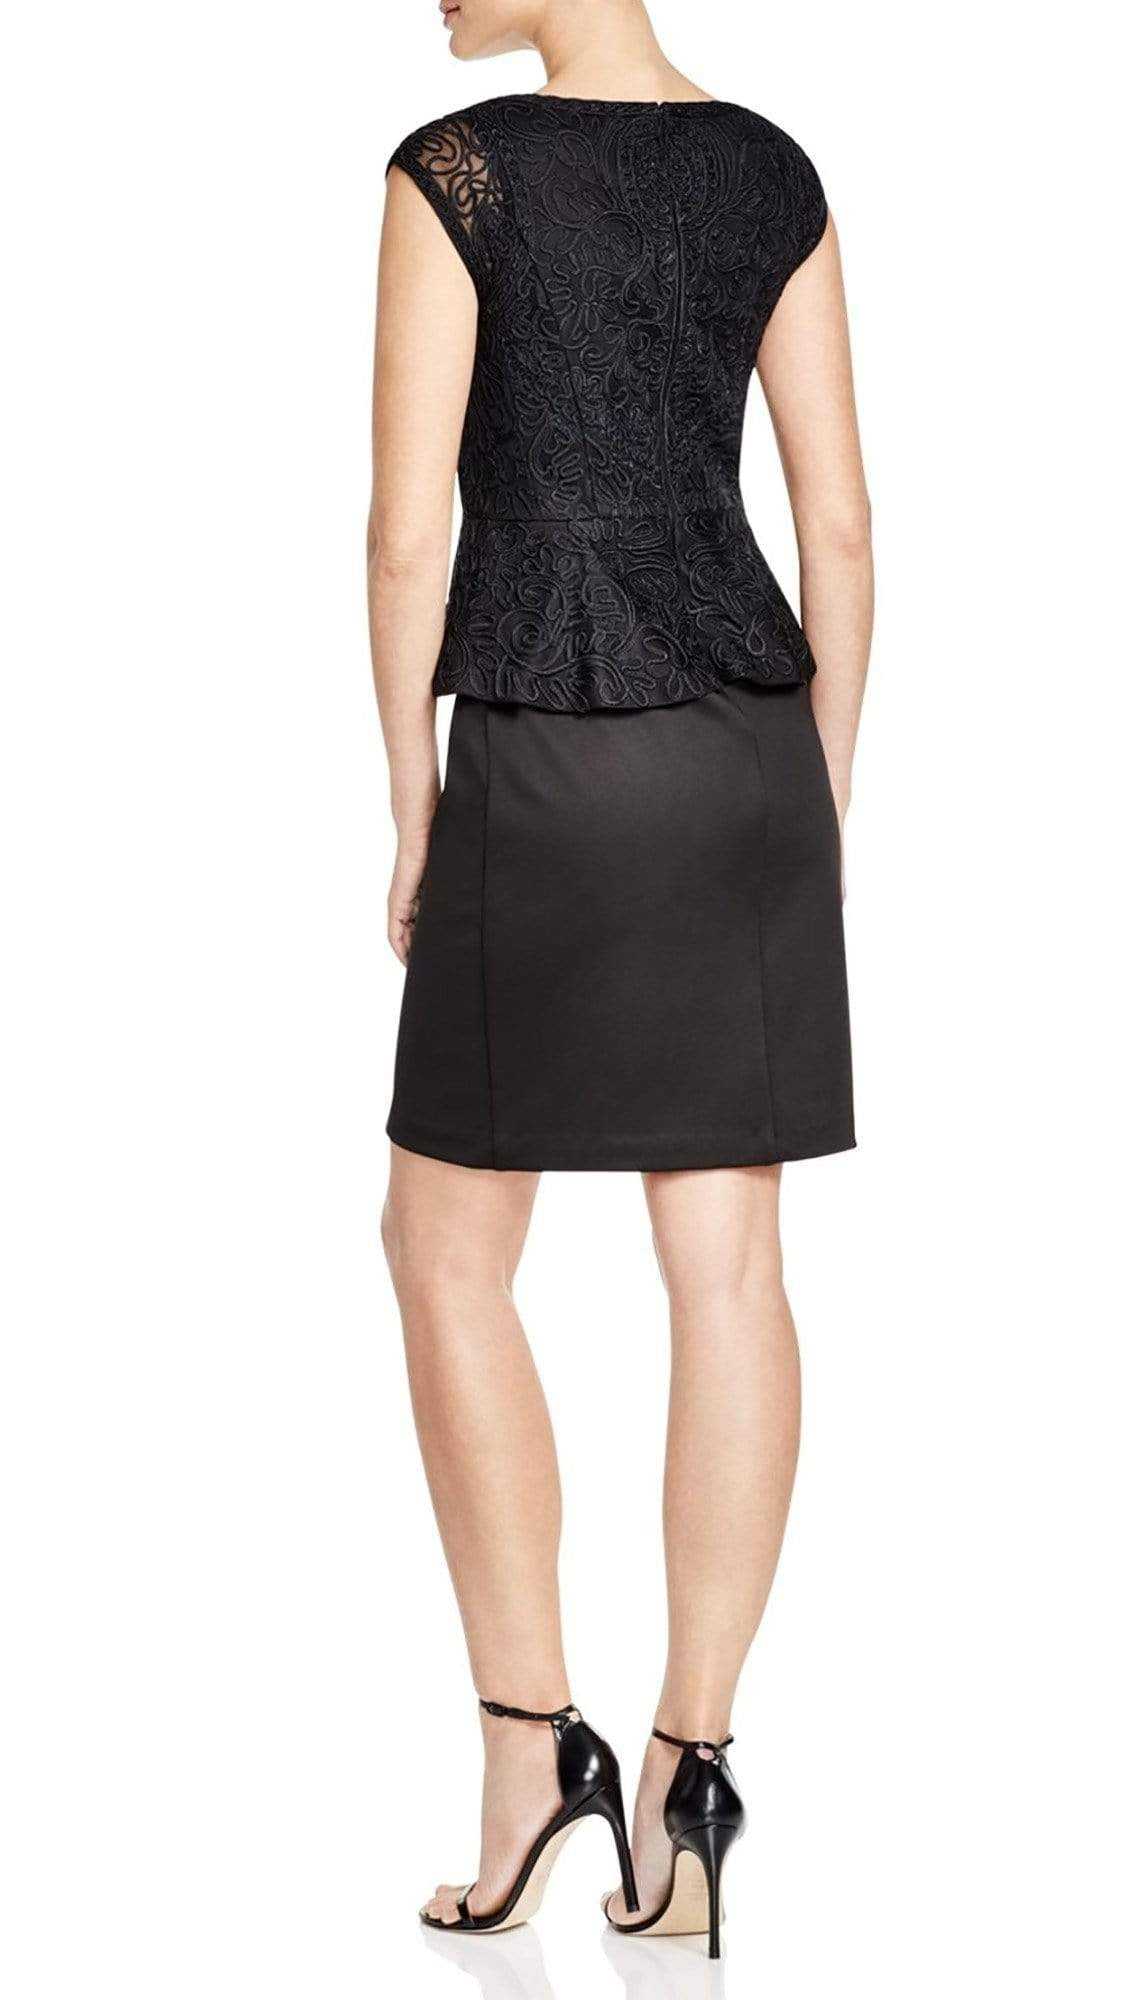 Sue Wong, Sue Wong Cap Sleeve Bateau Neck Cocktail Dress in Black N16104 - 1 pc Black in Size 10 Available